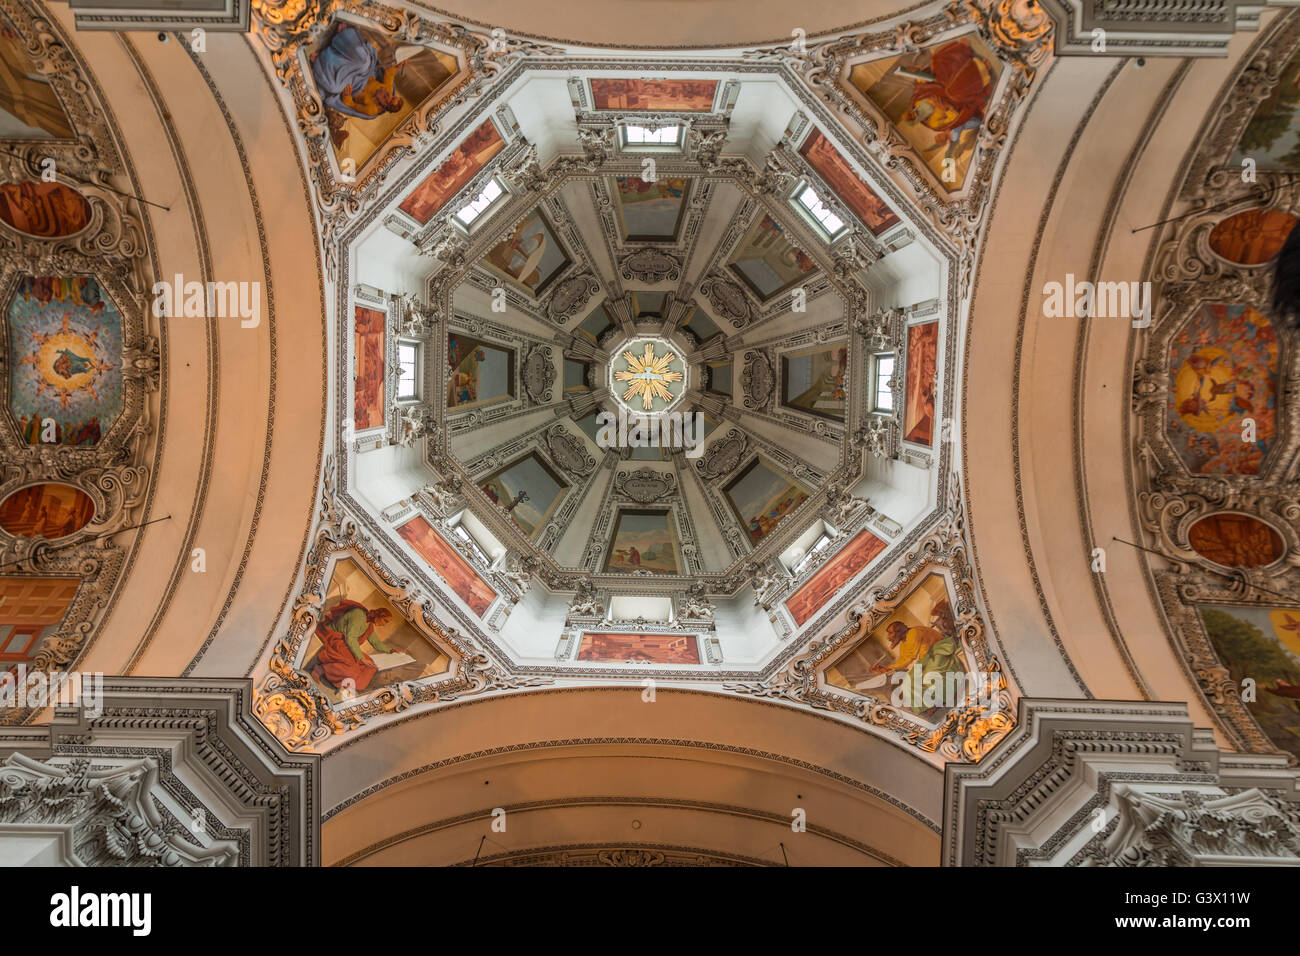 Dome of Salzburg Cathedral in Austria Stock Photo